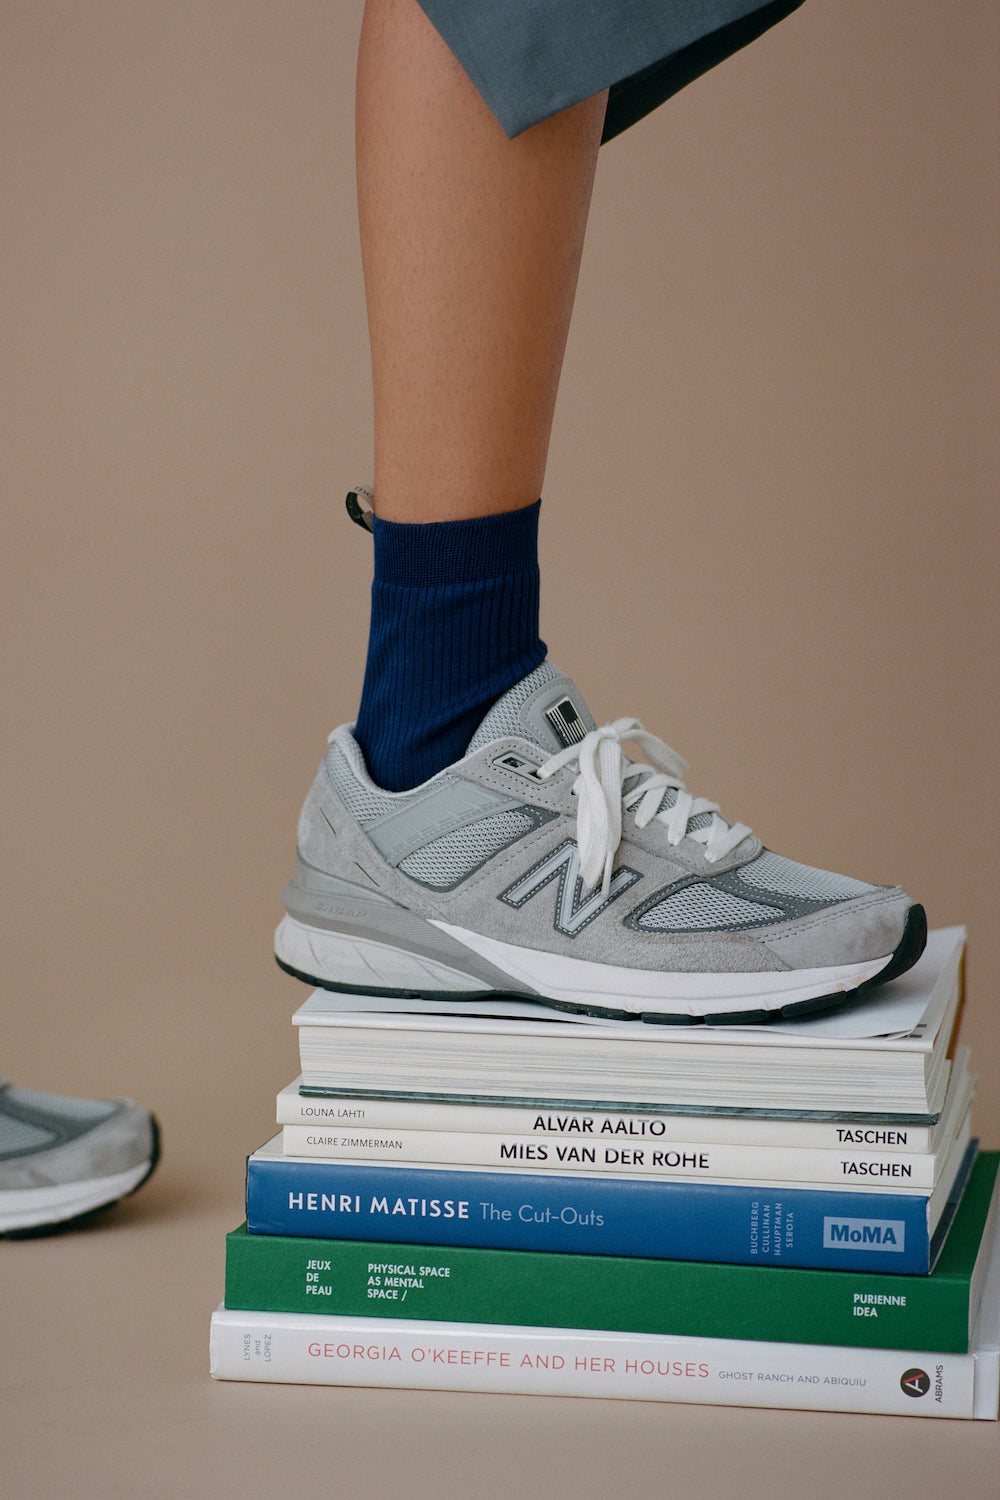 The Agnelli Sock in Varsity Blue, Egyptian Cotton, with grey sneakers